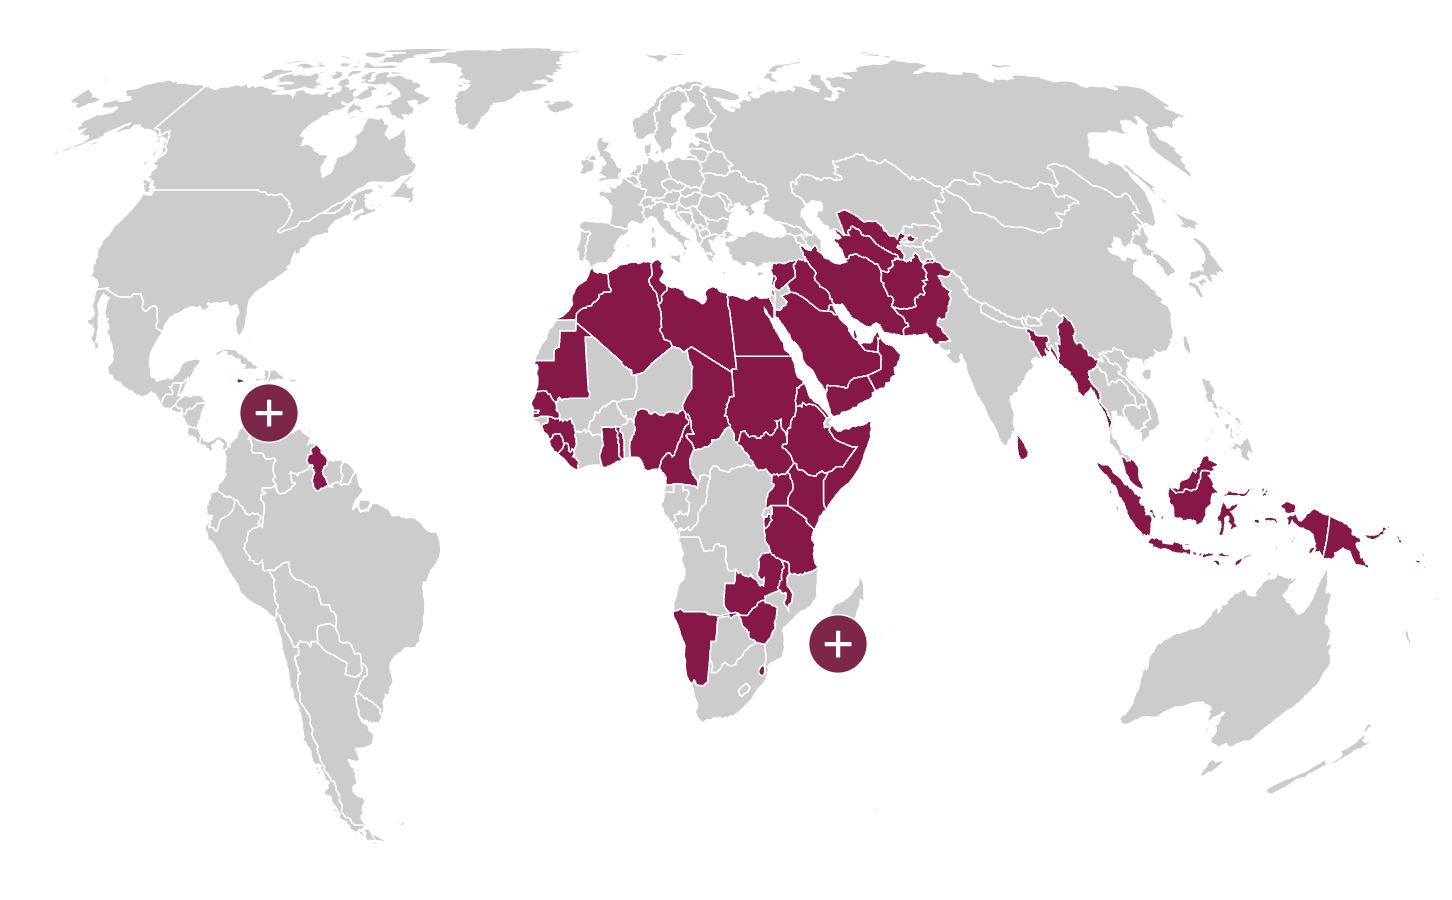 Map of Countries that Criminalise LGBT People